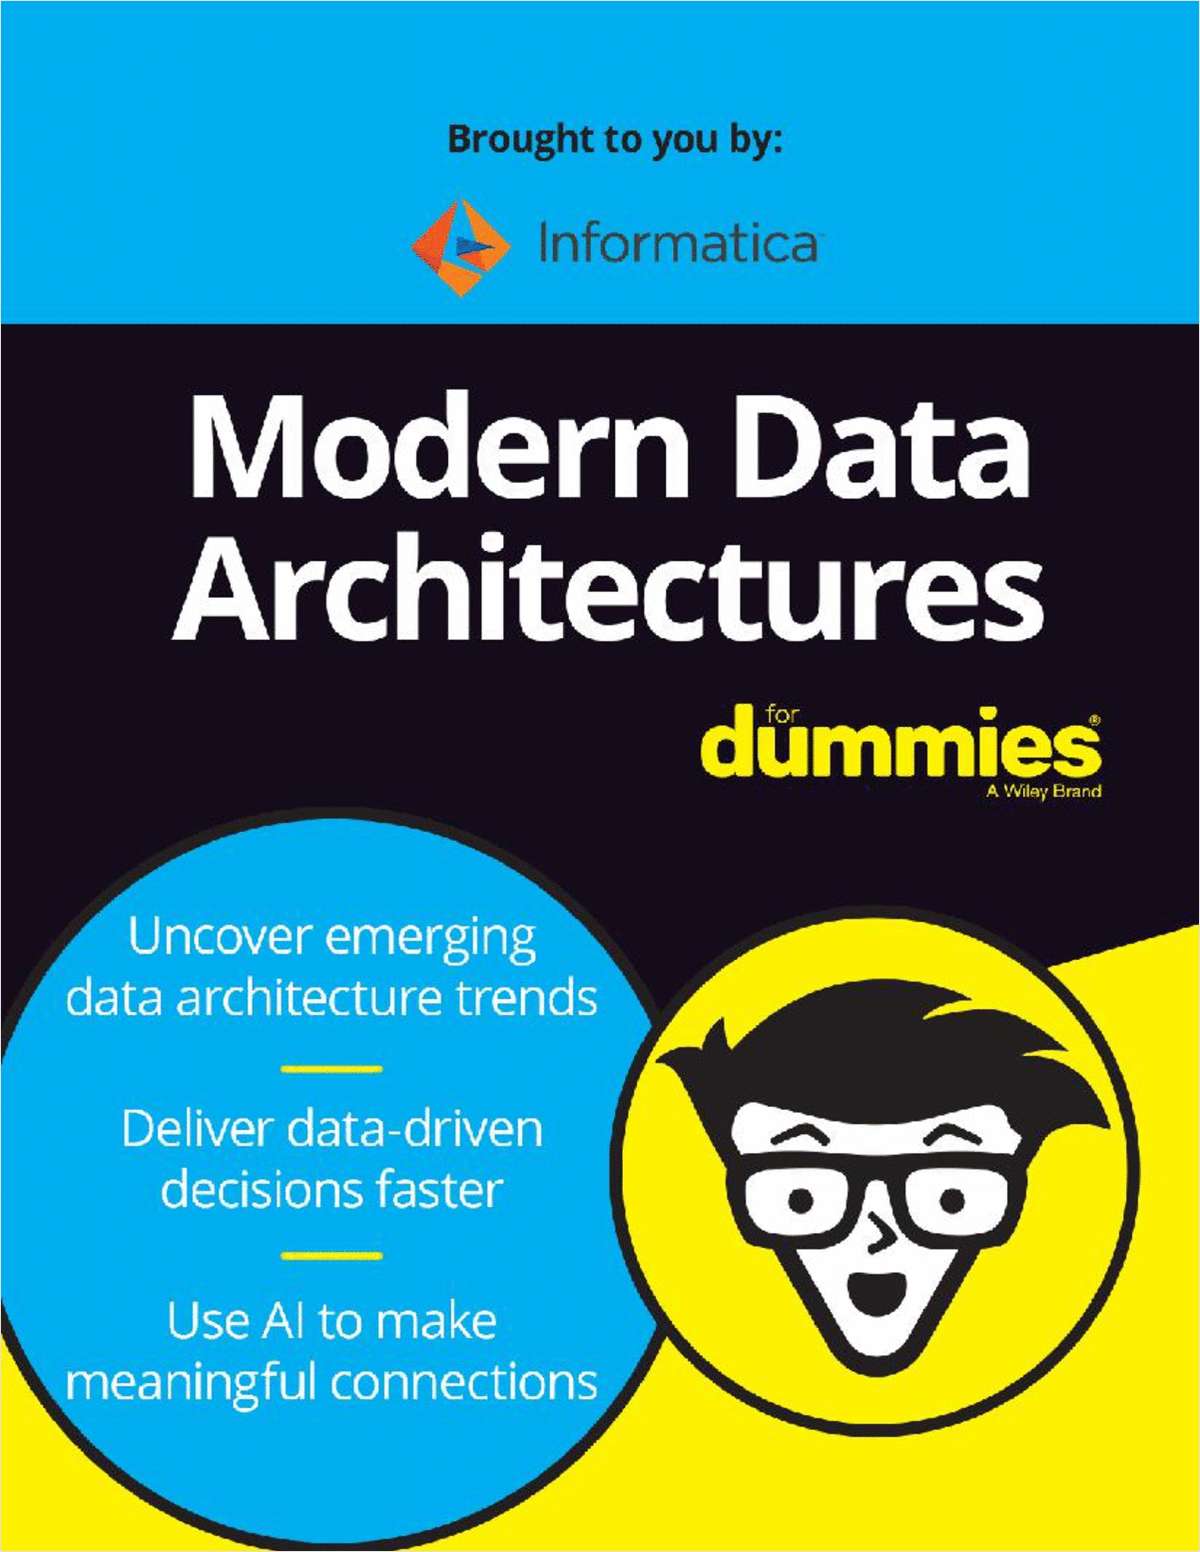 Become an Expert at Modern Data Architectures